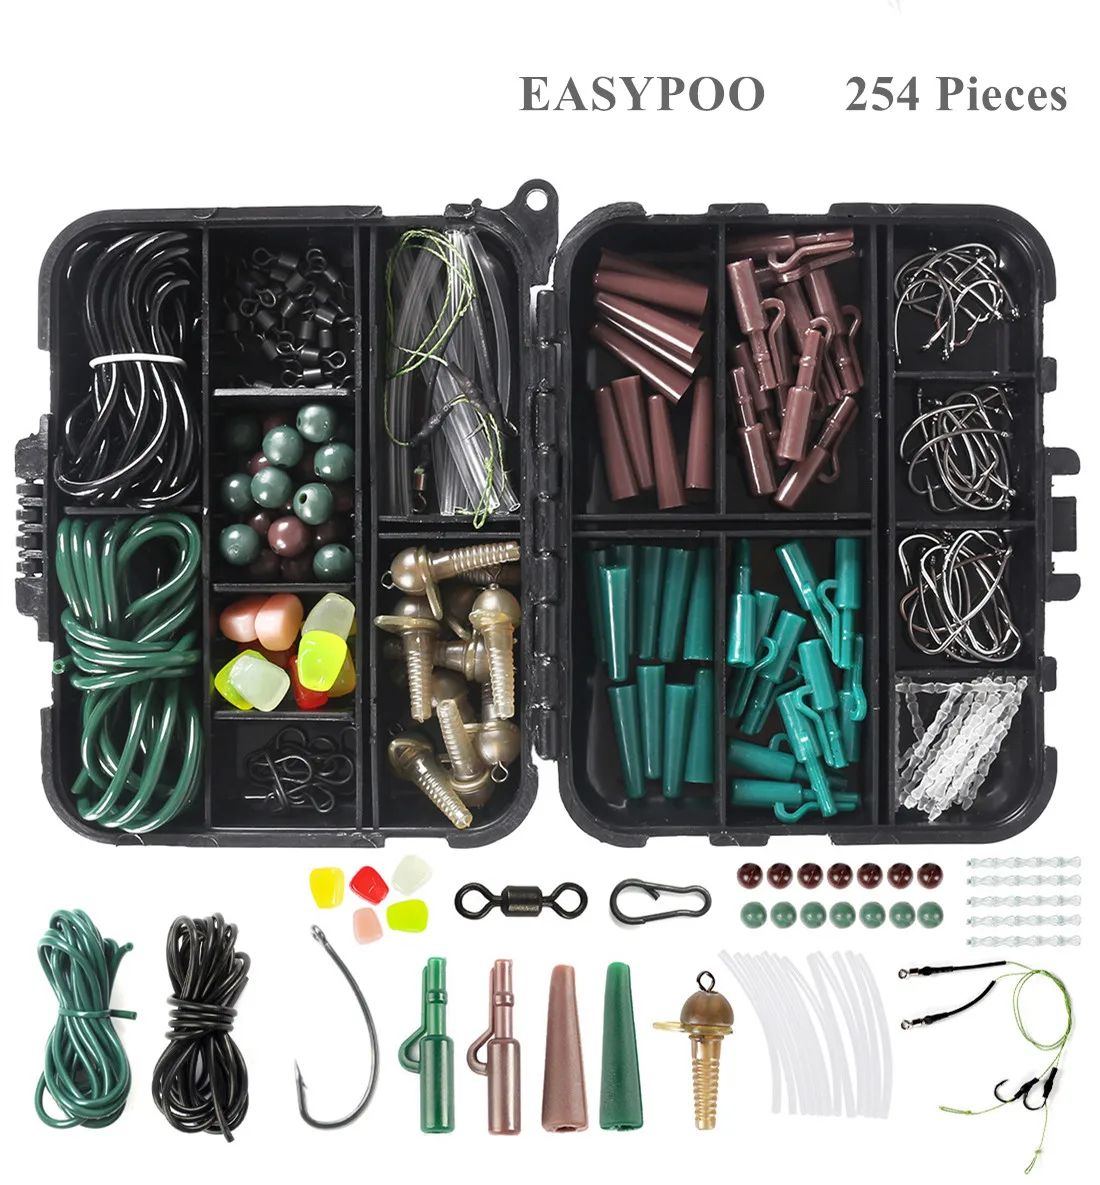 

EASYPOO 254 Pieces Carp Fishing Tackle Accessories Kit Metal Clips Carp Swivels Hooks Beads Fishing Accessories, Red, green, blue, black